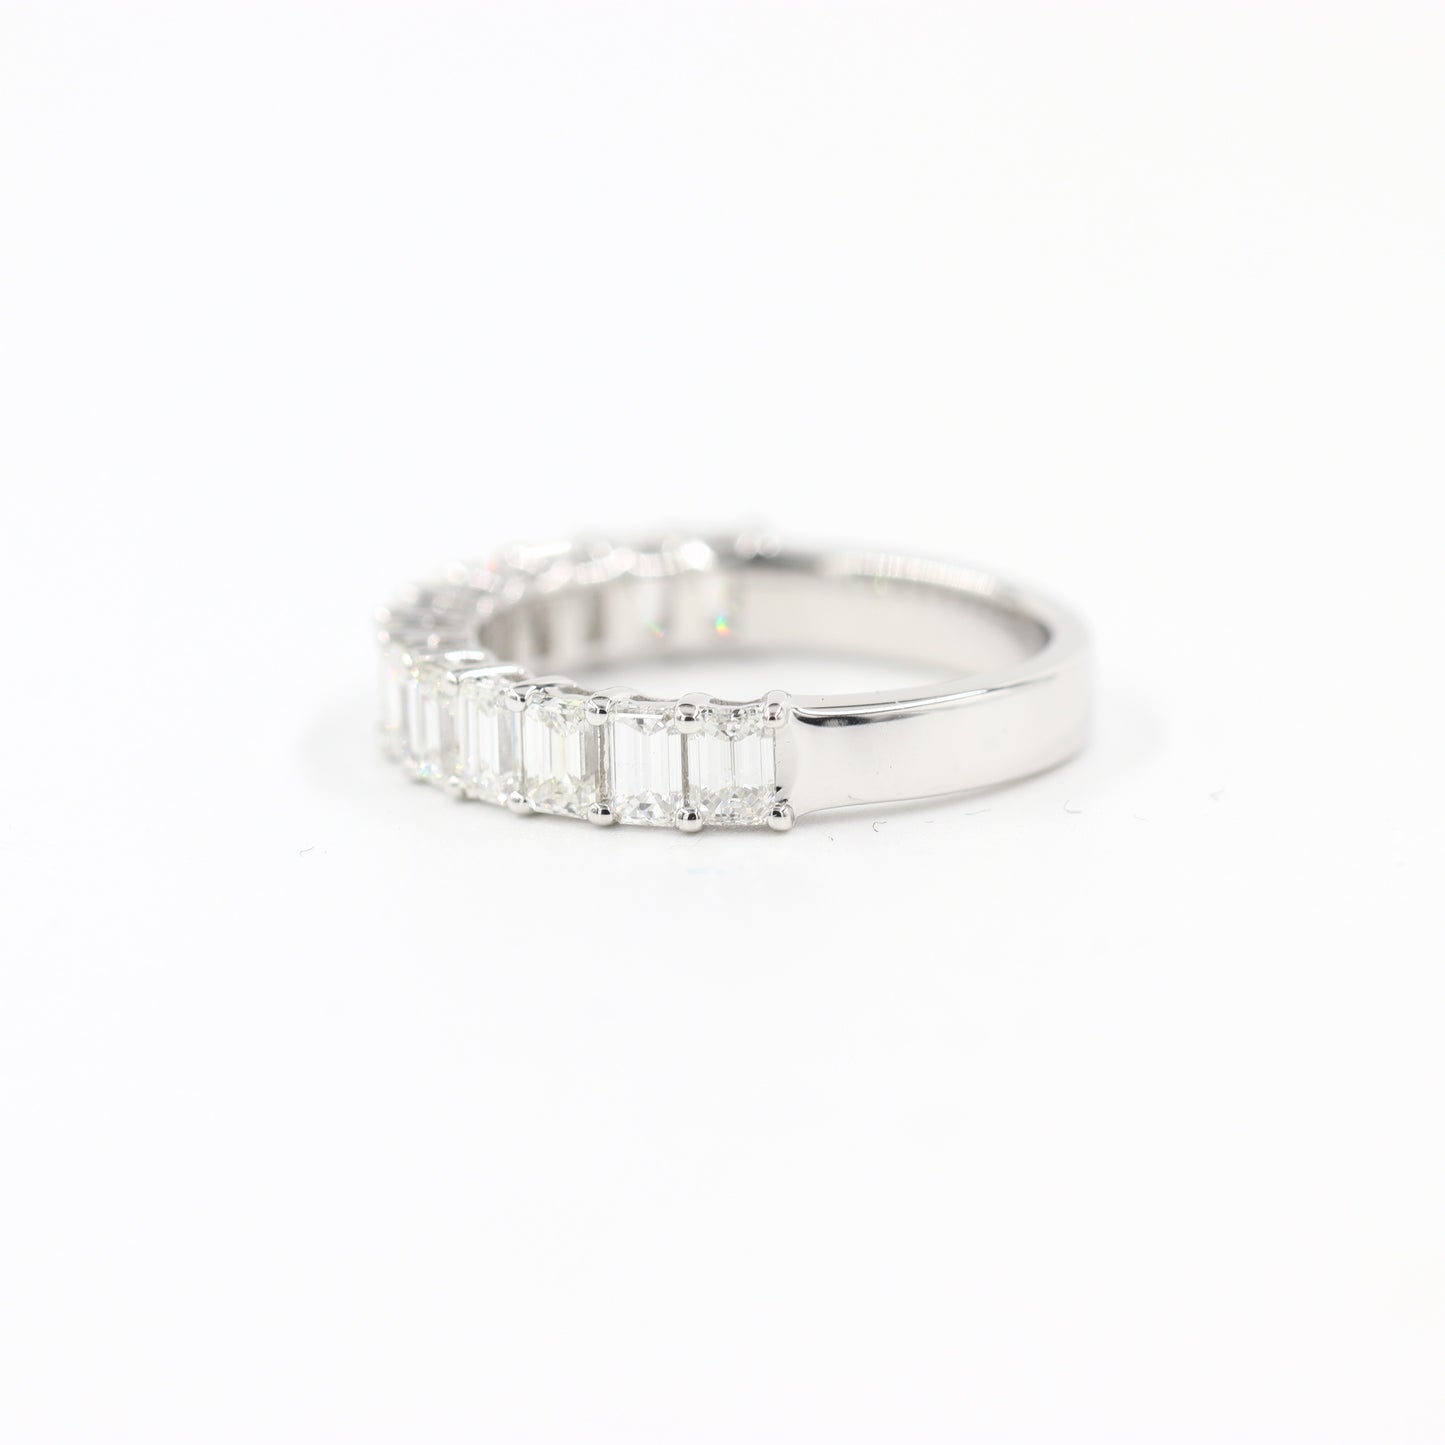 Emerald Cut 13 Stones Diamond Band/Half Eternity Wedding Band/Stackable Diamond Band/ Width 3.8mm ring/gifts for her